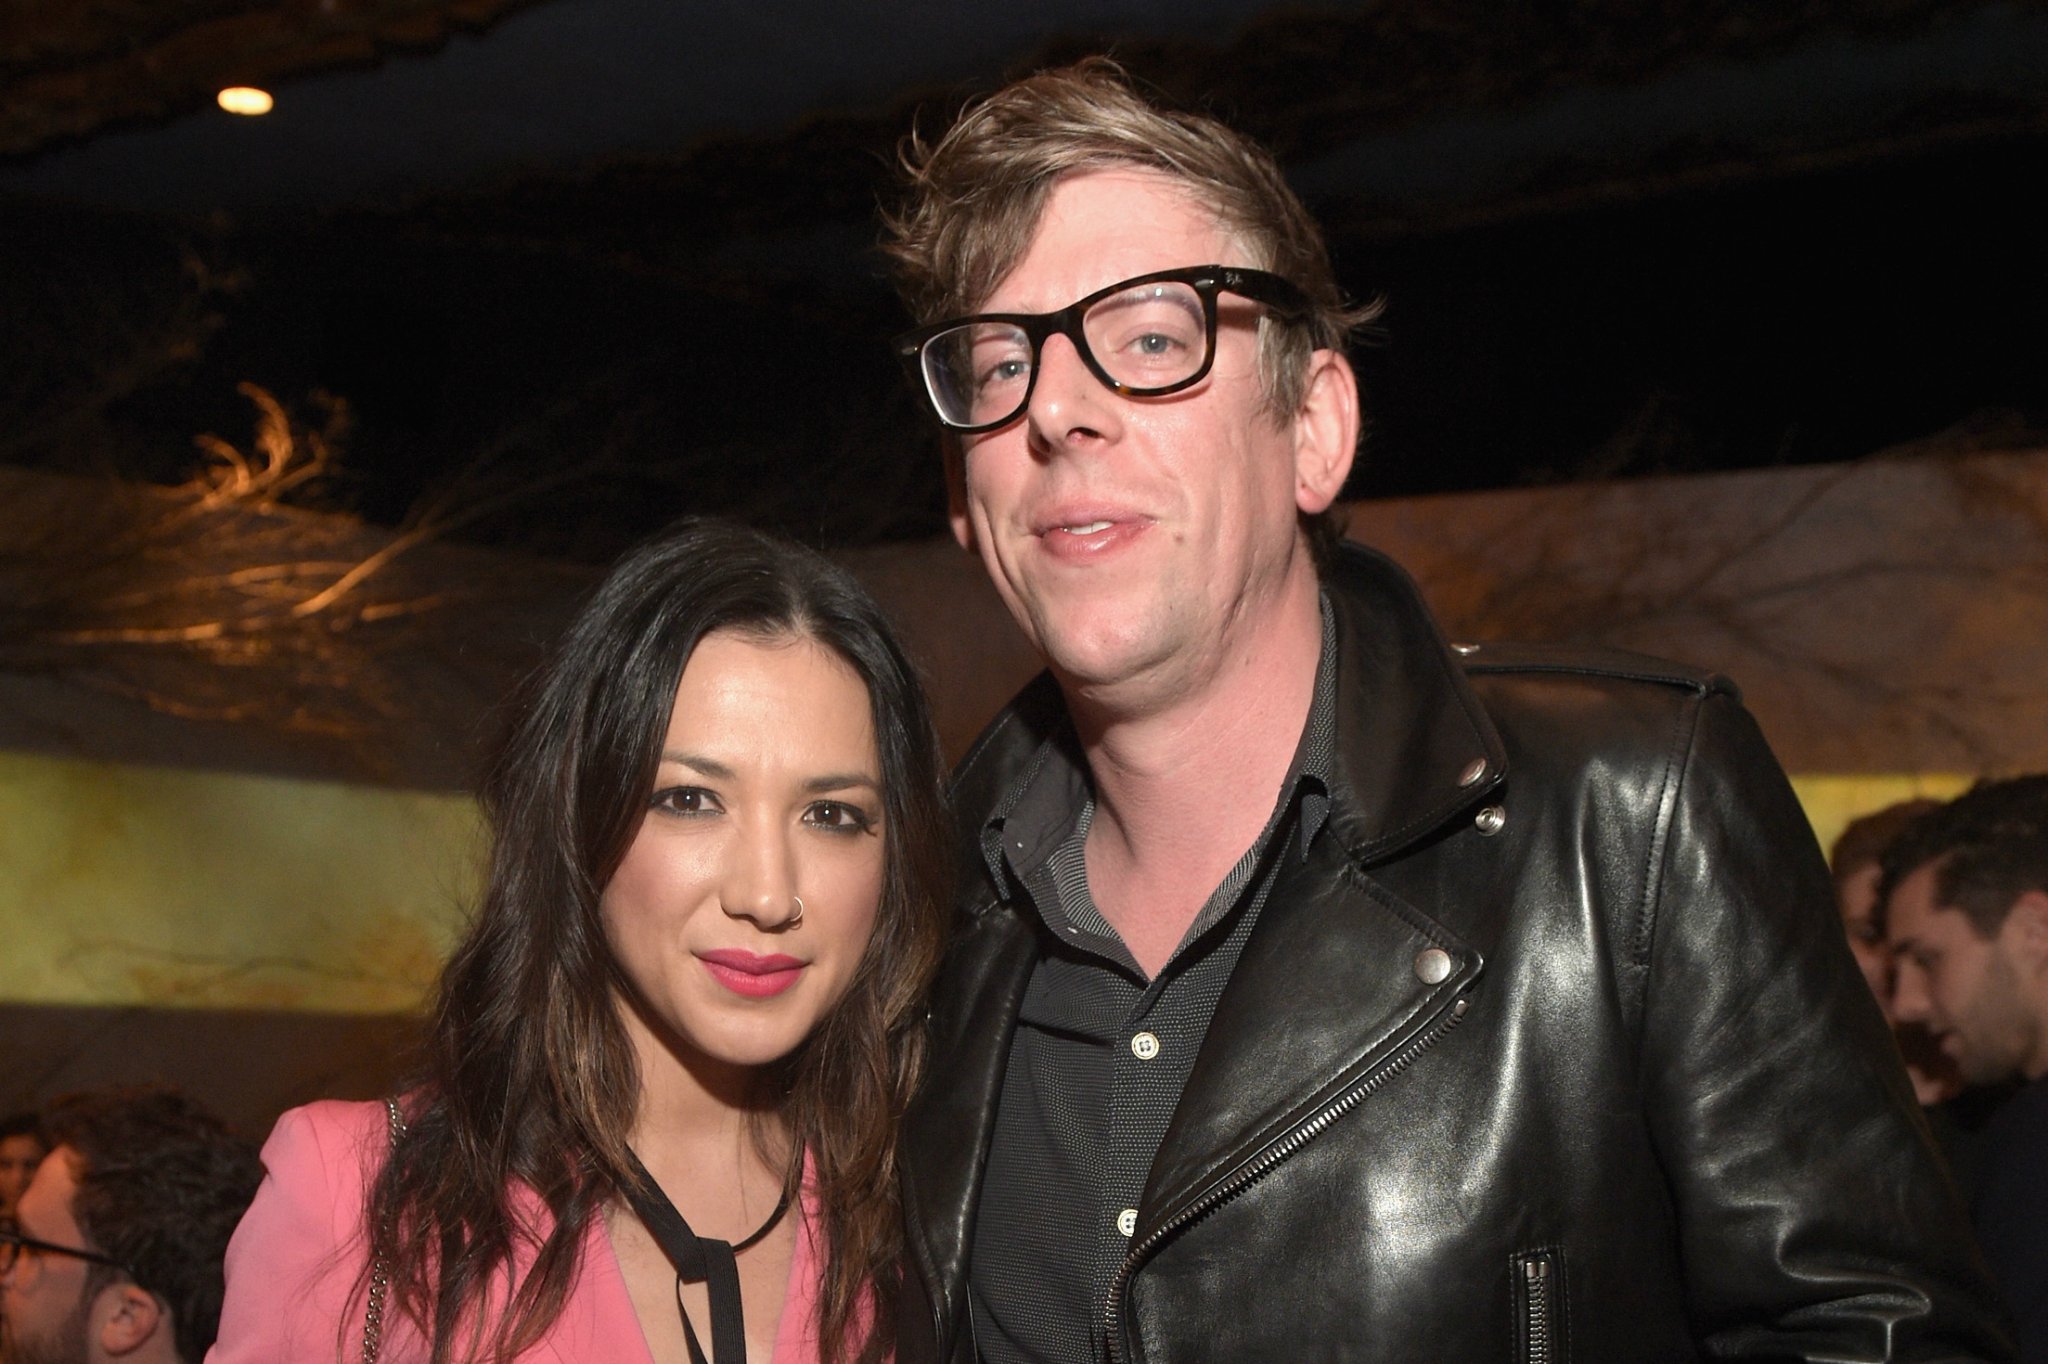 Patrick Carney and Michelle Branch Cover "A Horse With No Name" for BoJack Horseman